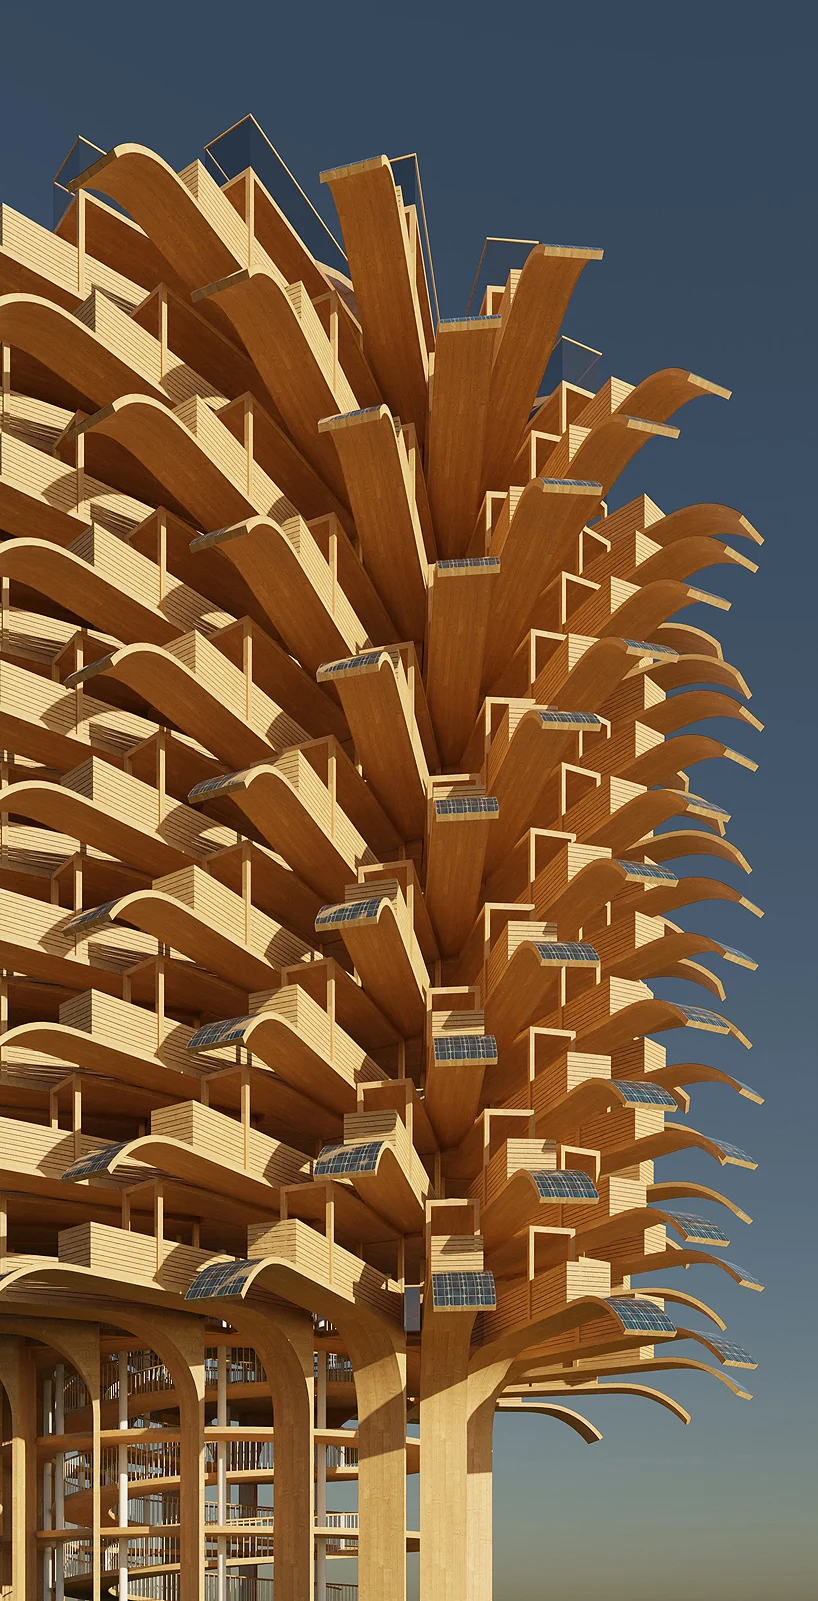 nudes-the-solar-tree-sustainable-observatory-tower-concept-designboom-3-1600585809.webp